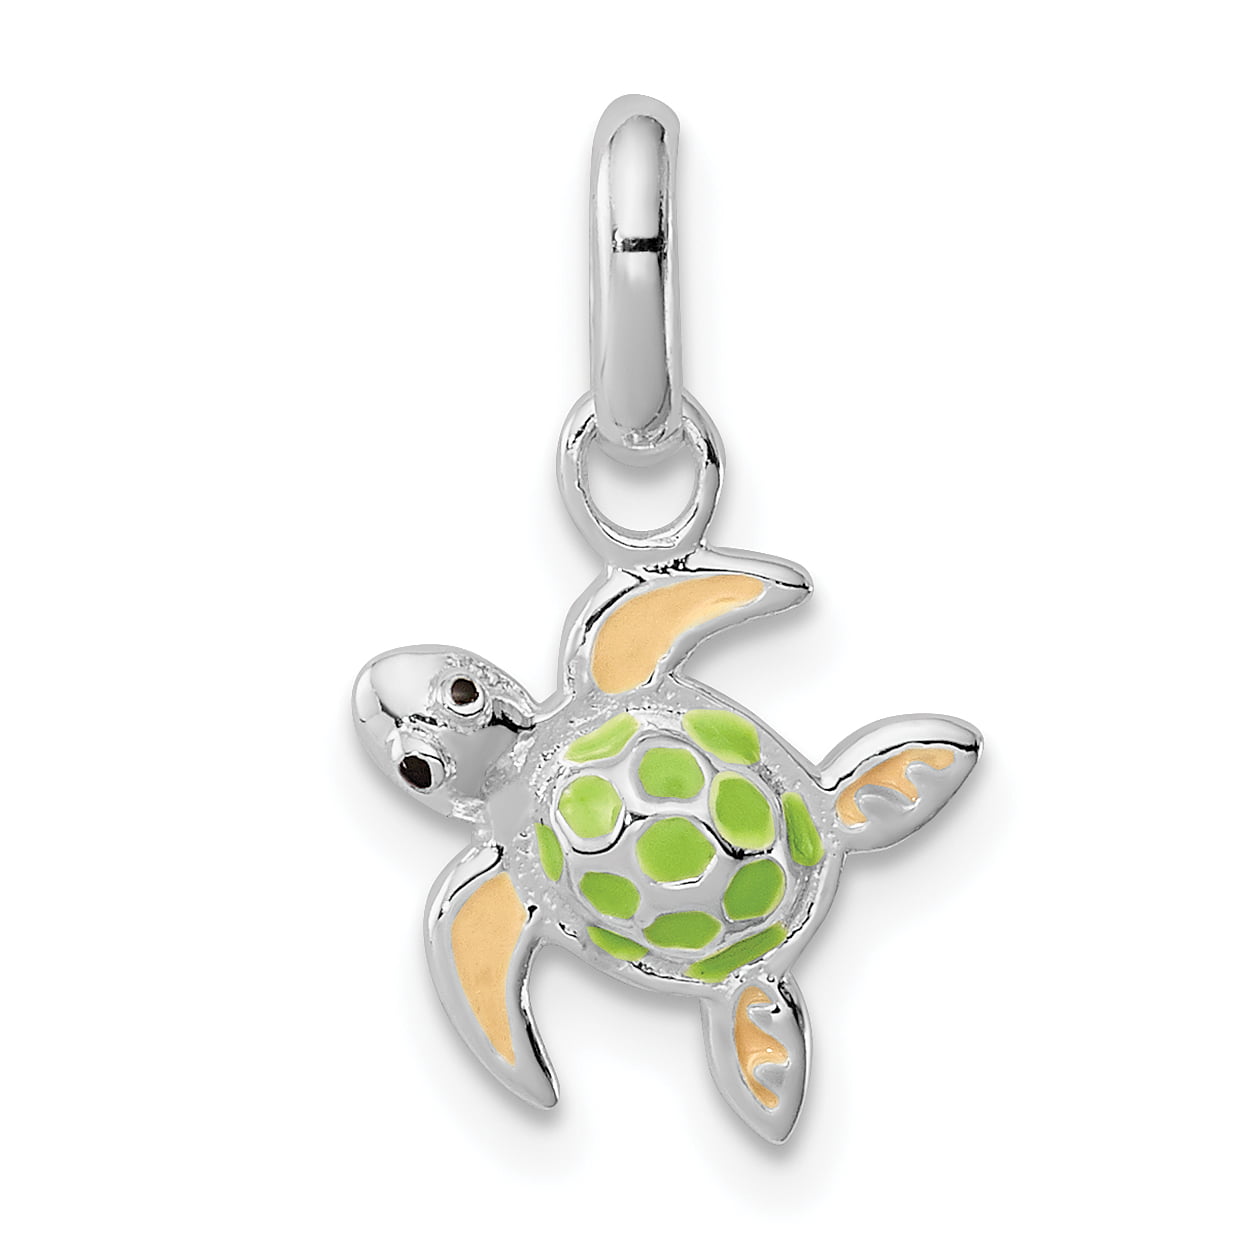 Sea Turtle Charms 925 Sterling Silver Animal Charm Sea Charm for Bracelet D 